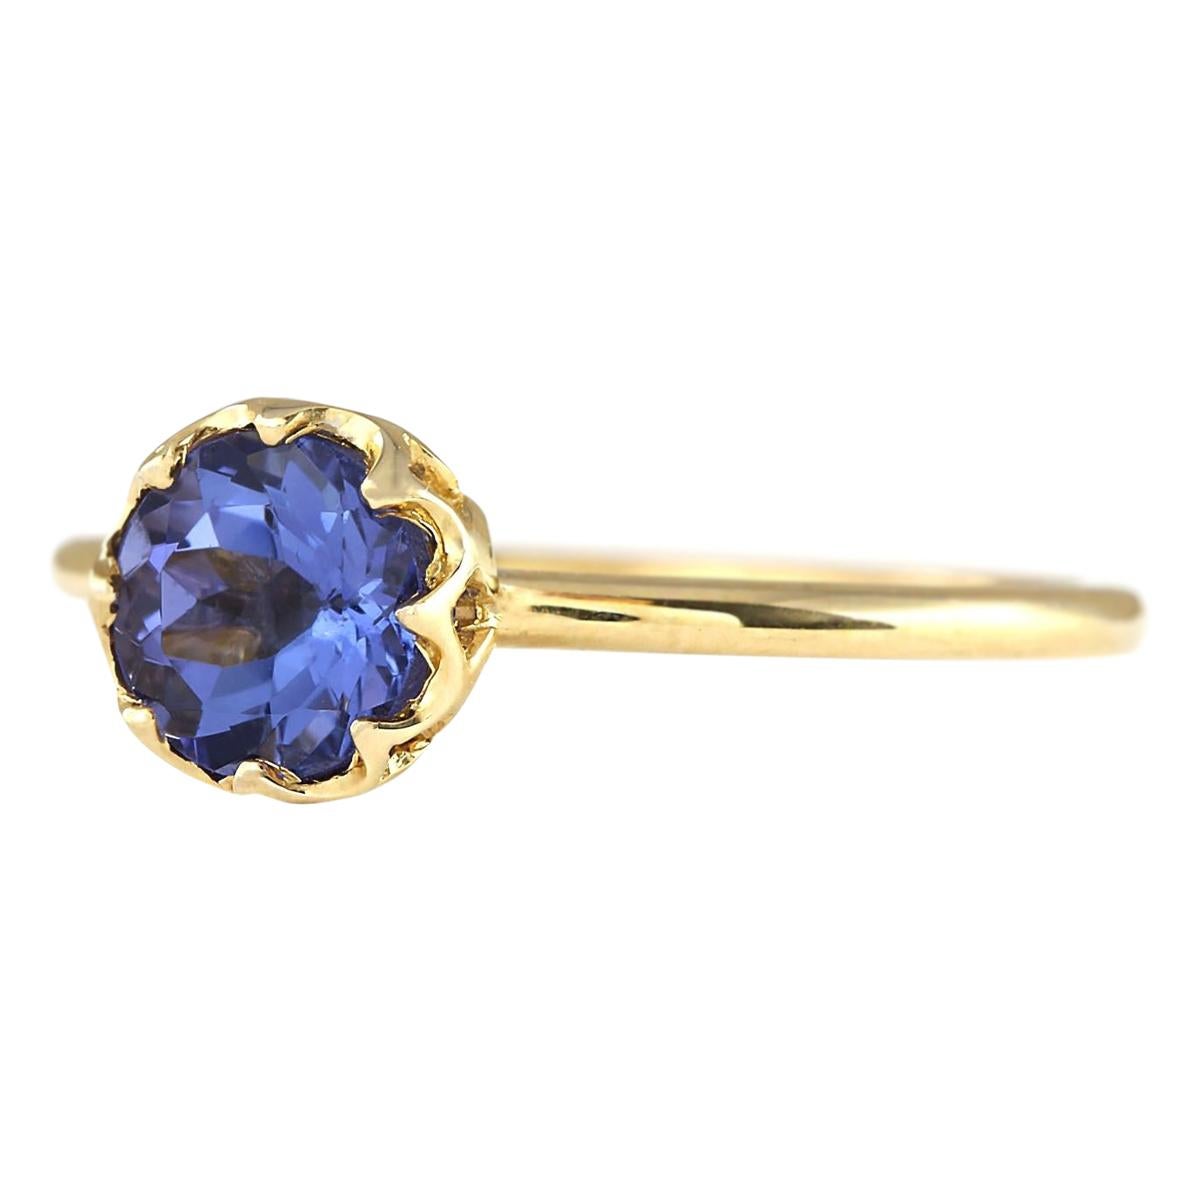 Stamped: 14K Yellow Gold
Total Ring Weight: 1.7 Grams
Total Natural Tanzanite Weight is 1.35 Carat
Color: Blue
Face Measures: 7.00x7.00 mm
Sku: [703246W]